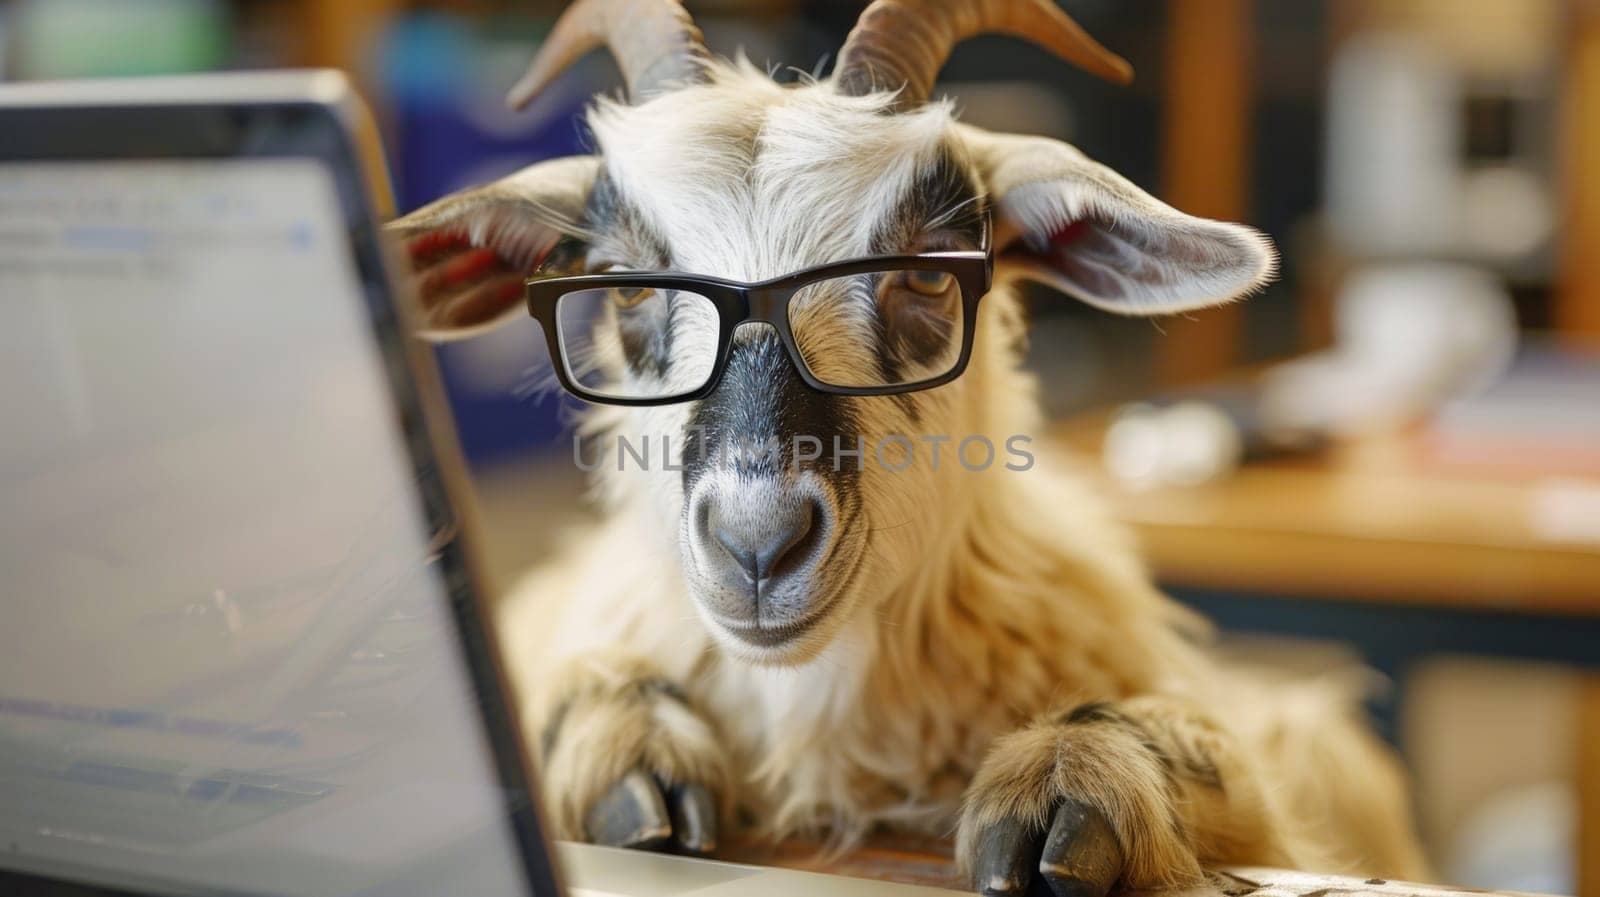 A goat wearing glasses and sitting at a computer desk, AI by starush